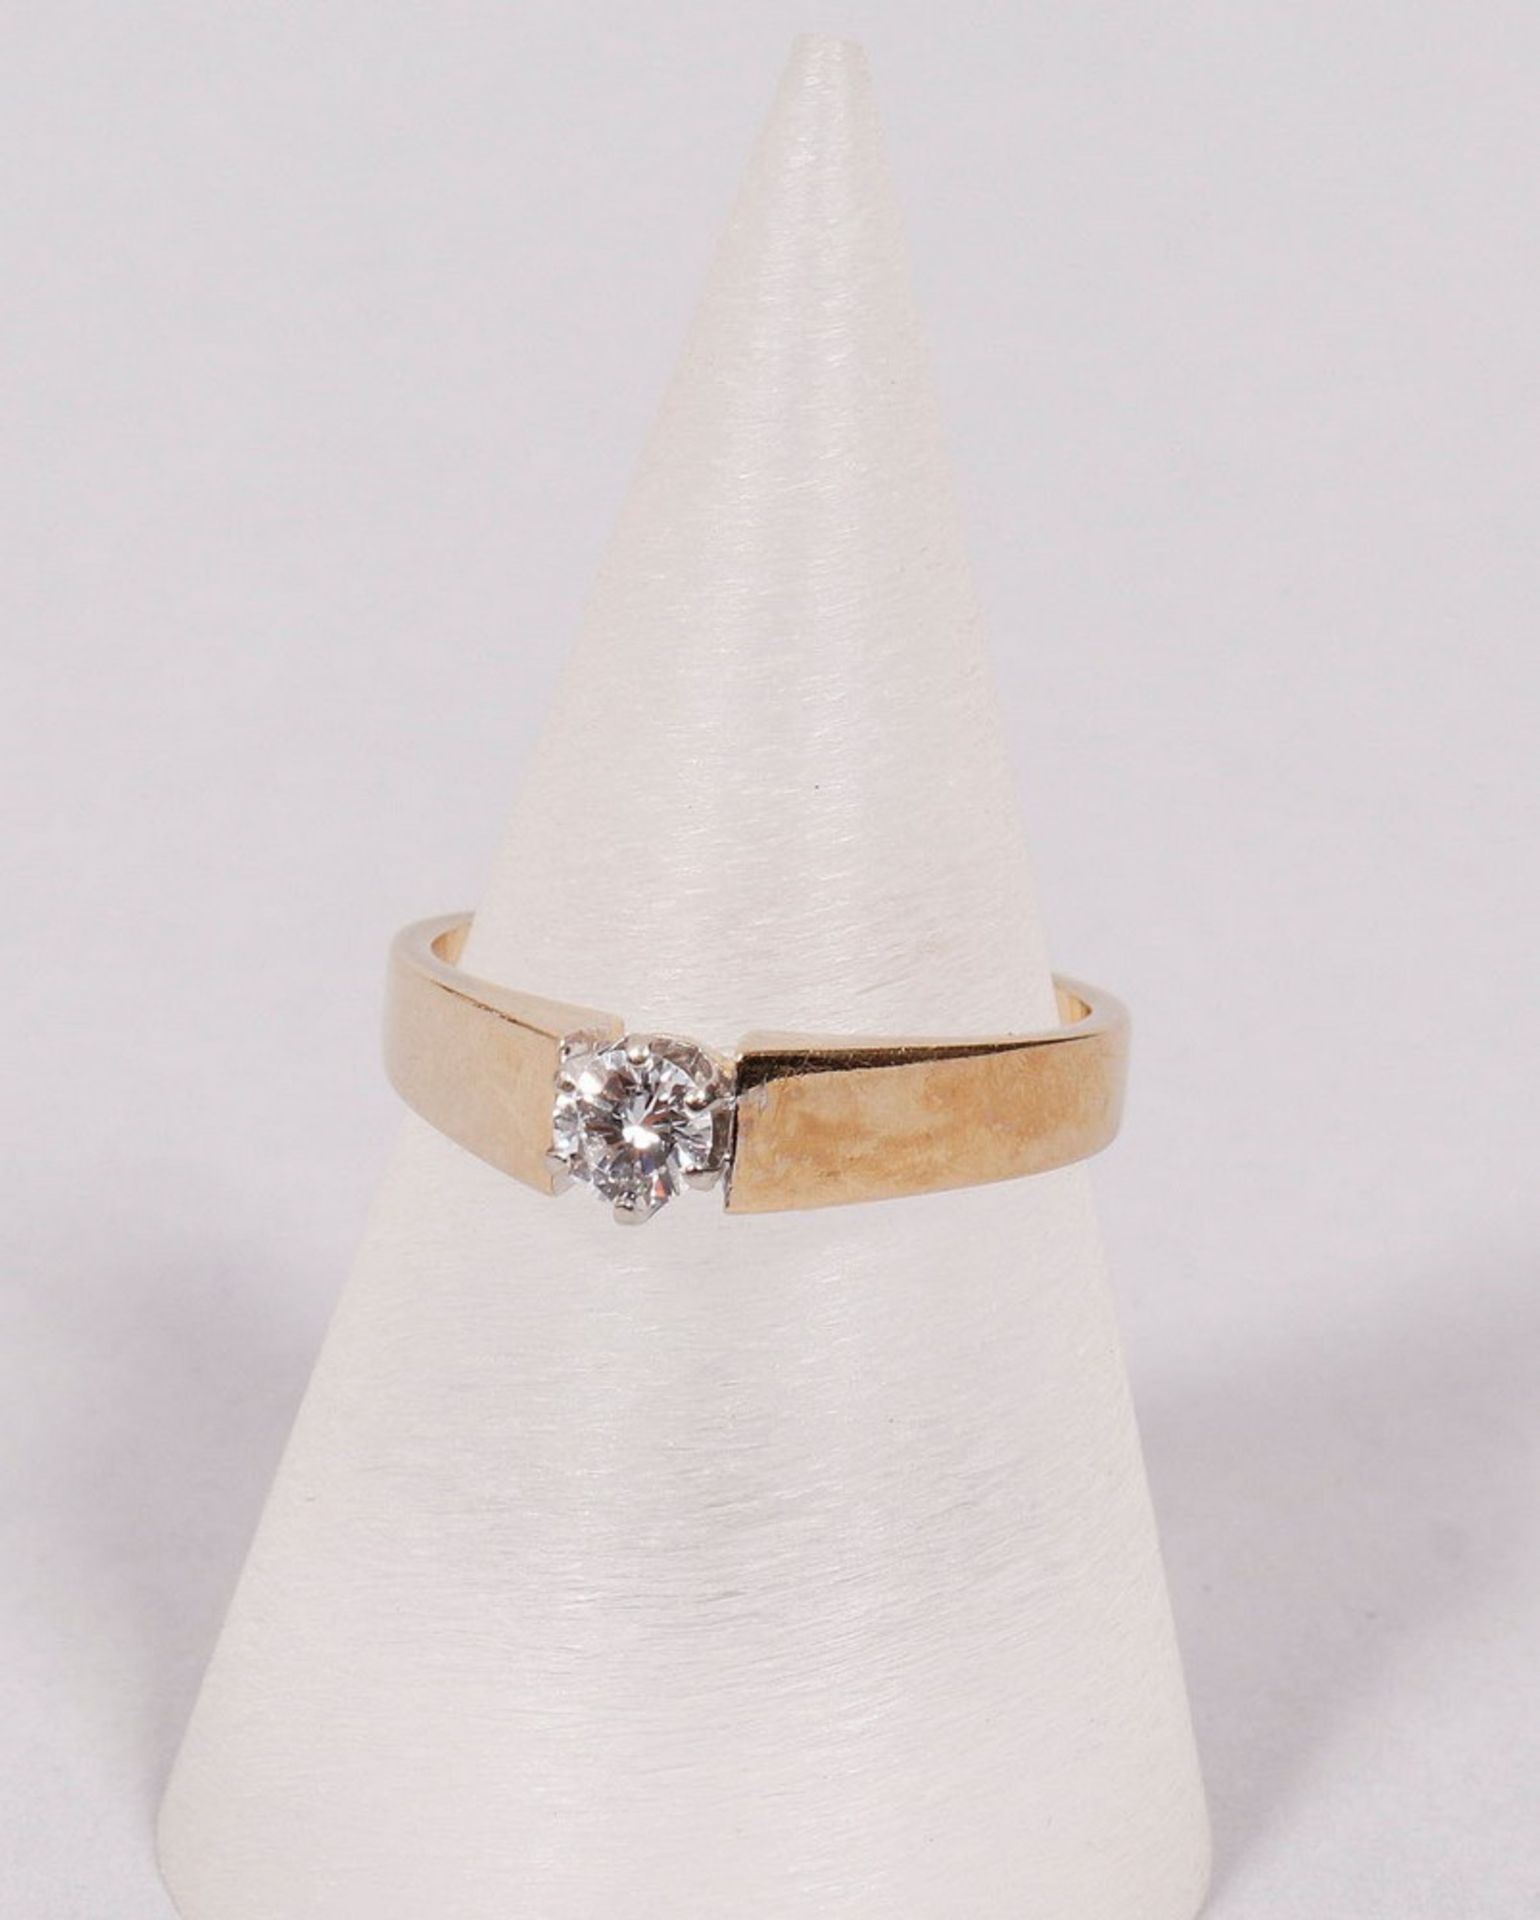 Ring, so-called engagement ring solitaire, 585 gold